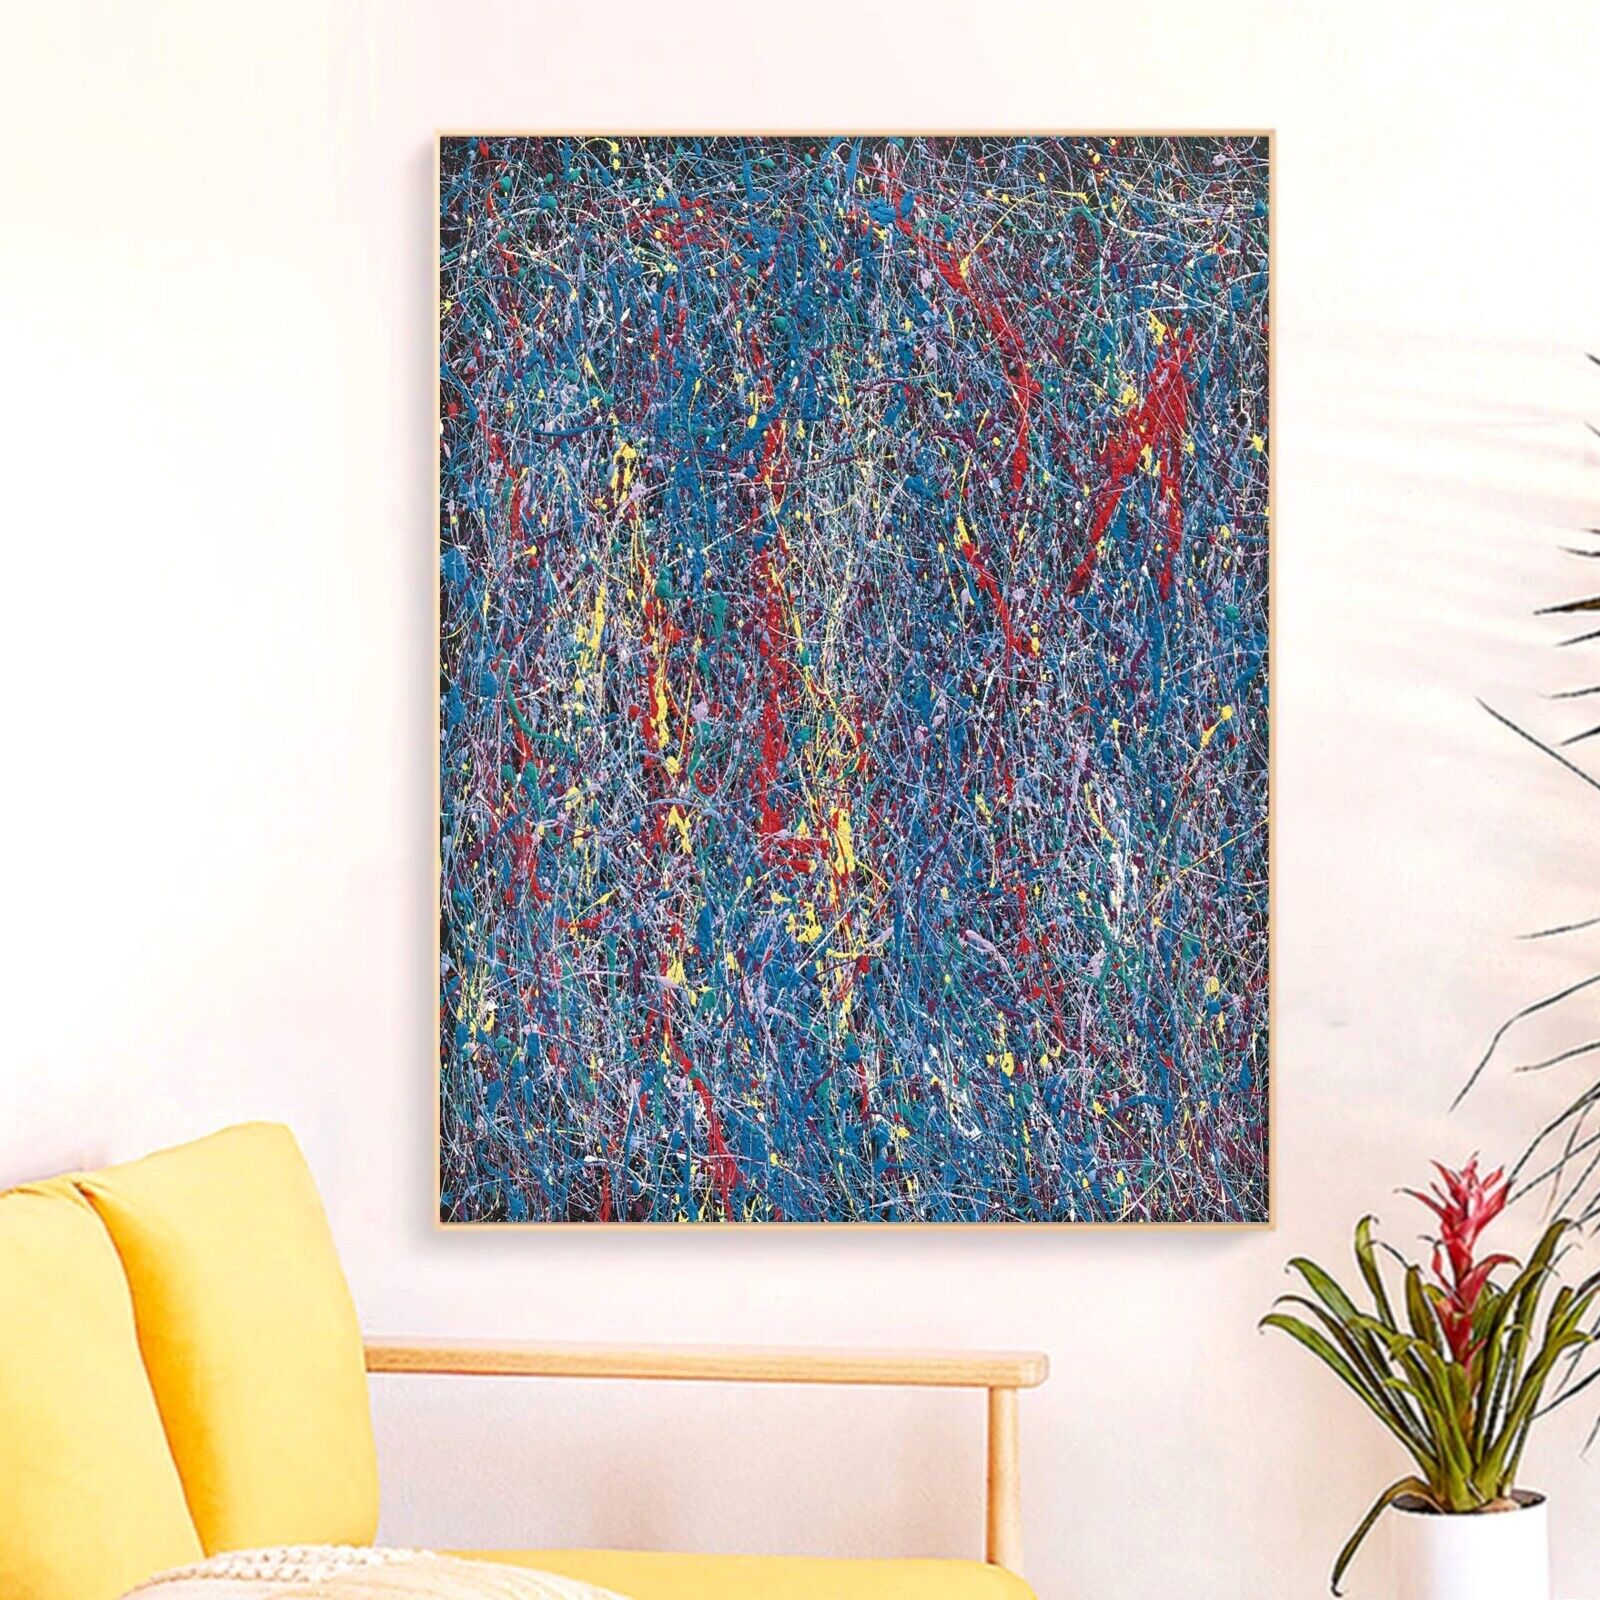 Sale Abstract Caribbean Red 24H X 18W Framed Canvas Giclee Winford $395 Now $195